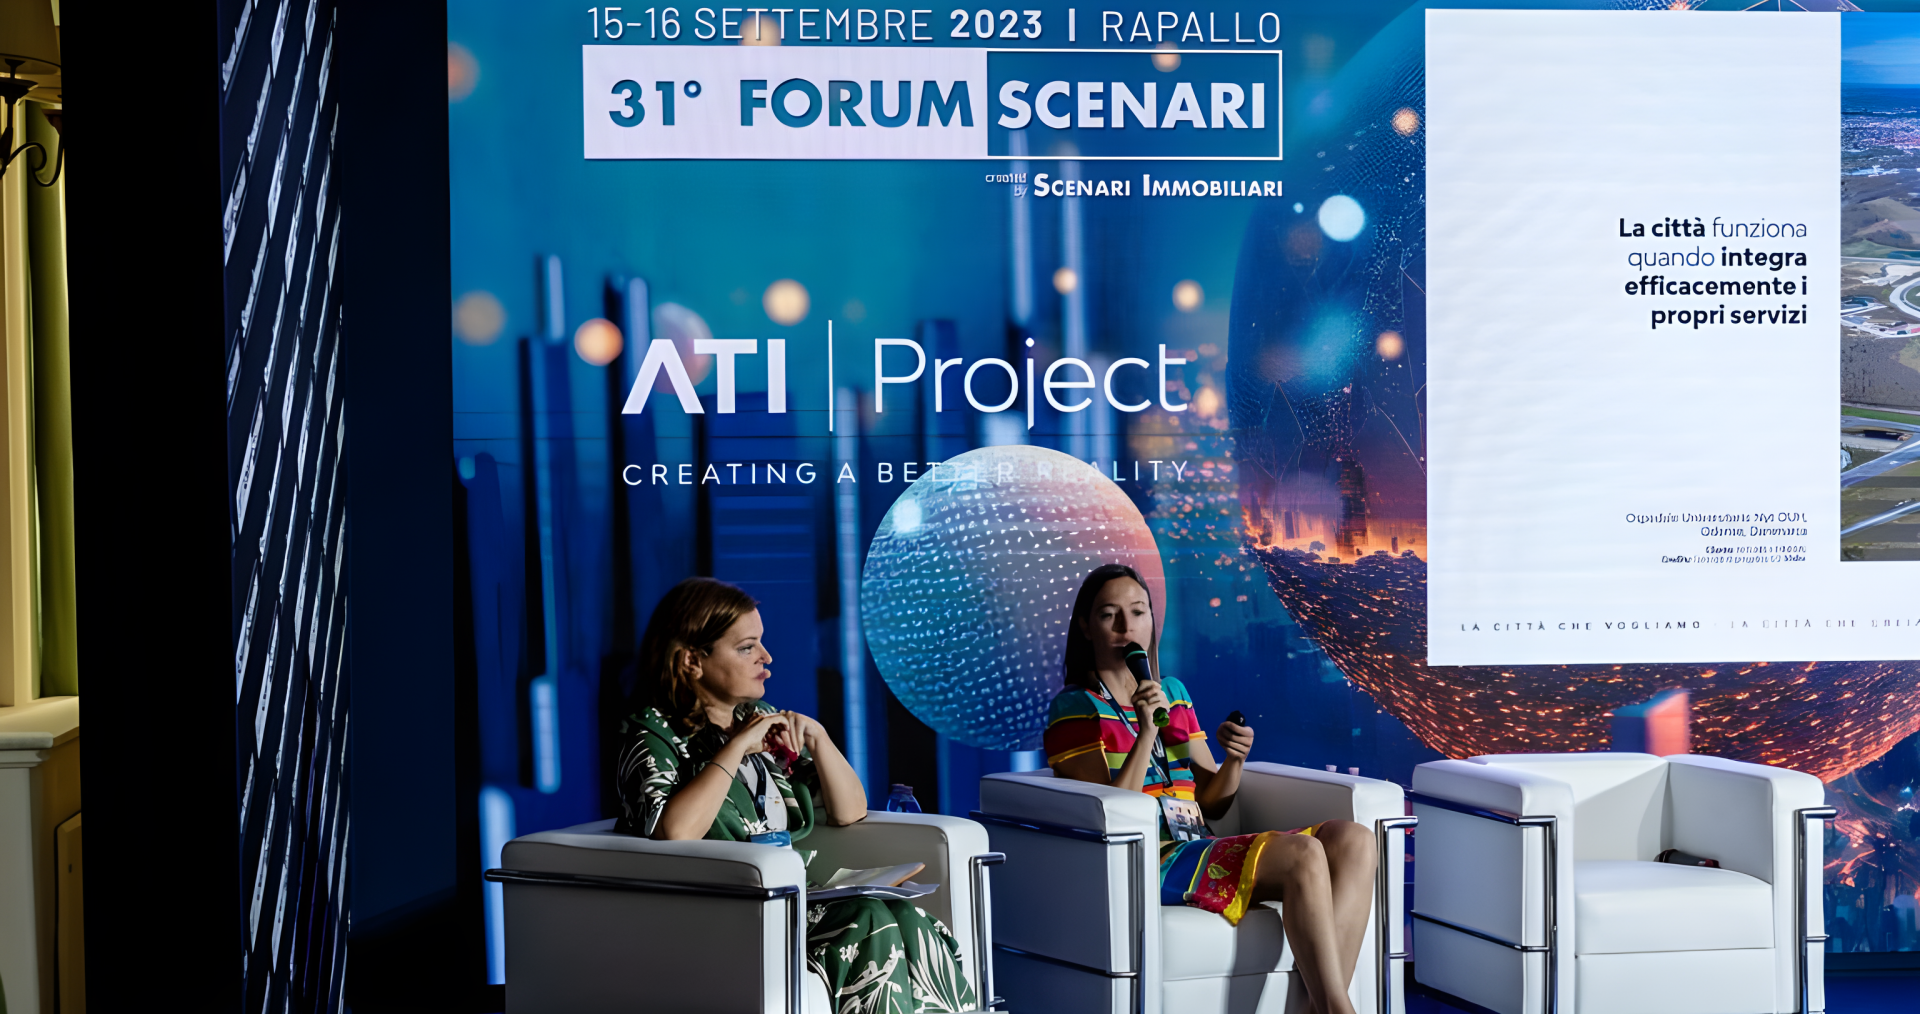 31° Forum Scenari: ATI Project presents a reflection on the ‘City to be’